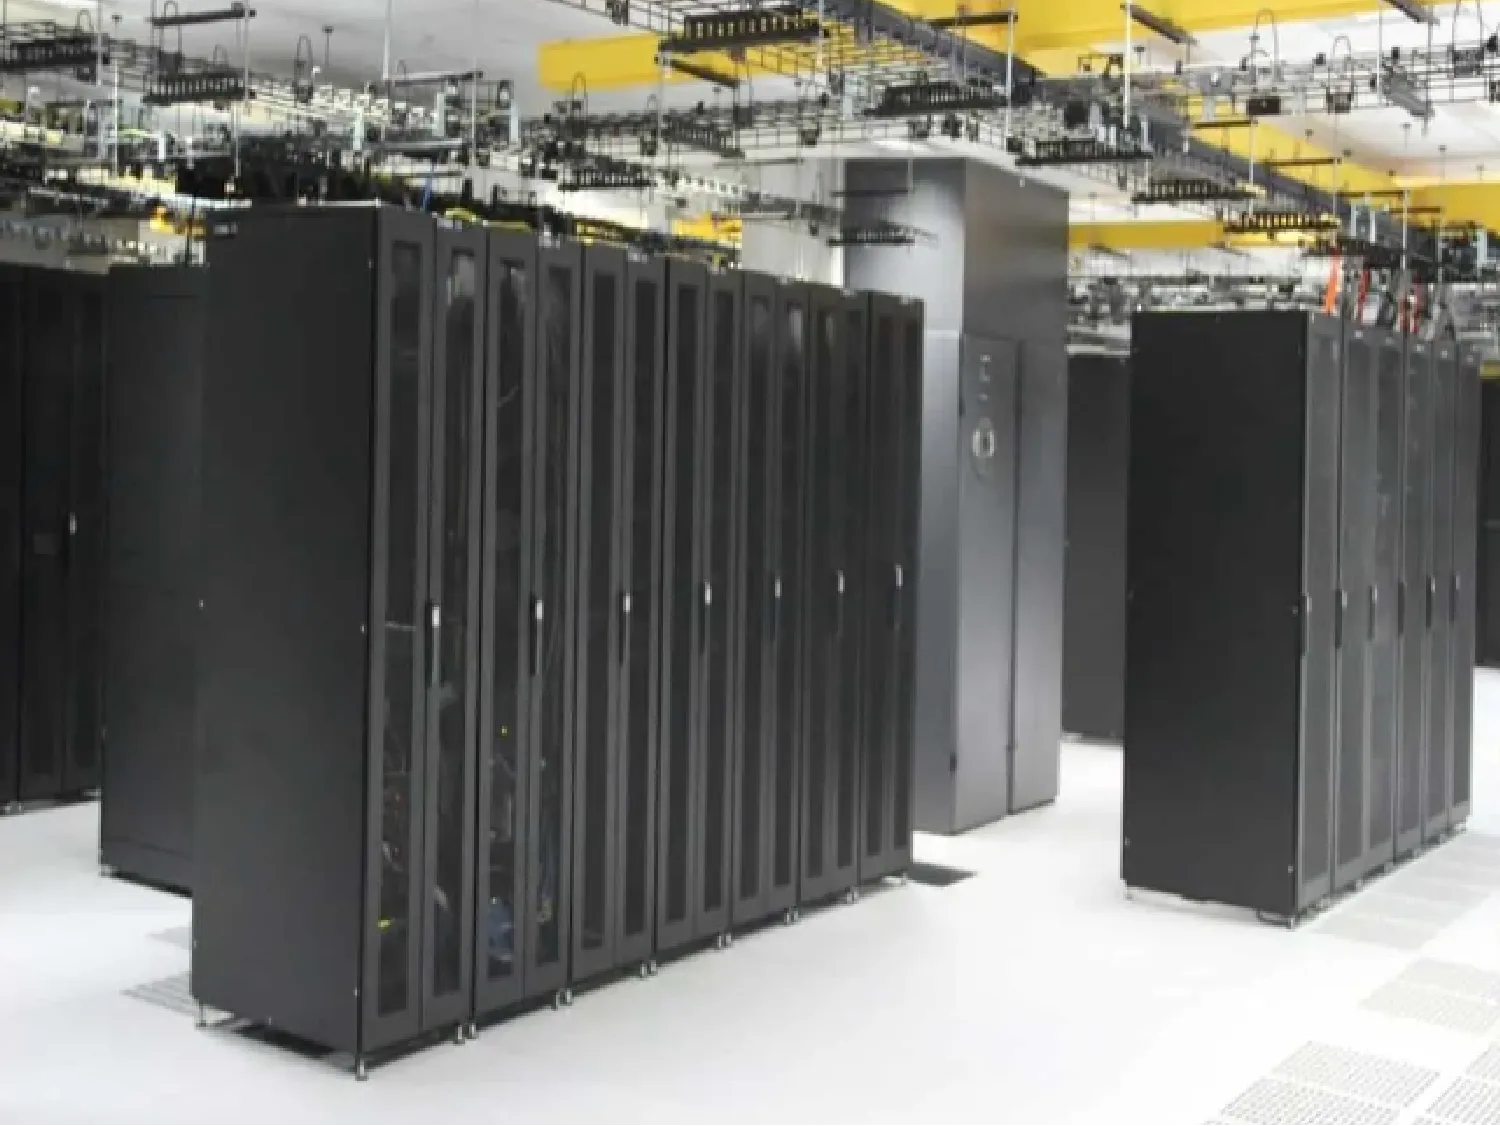 colocation network